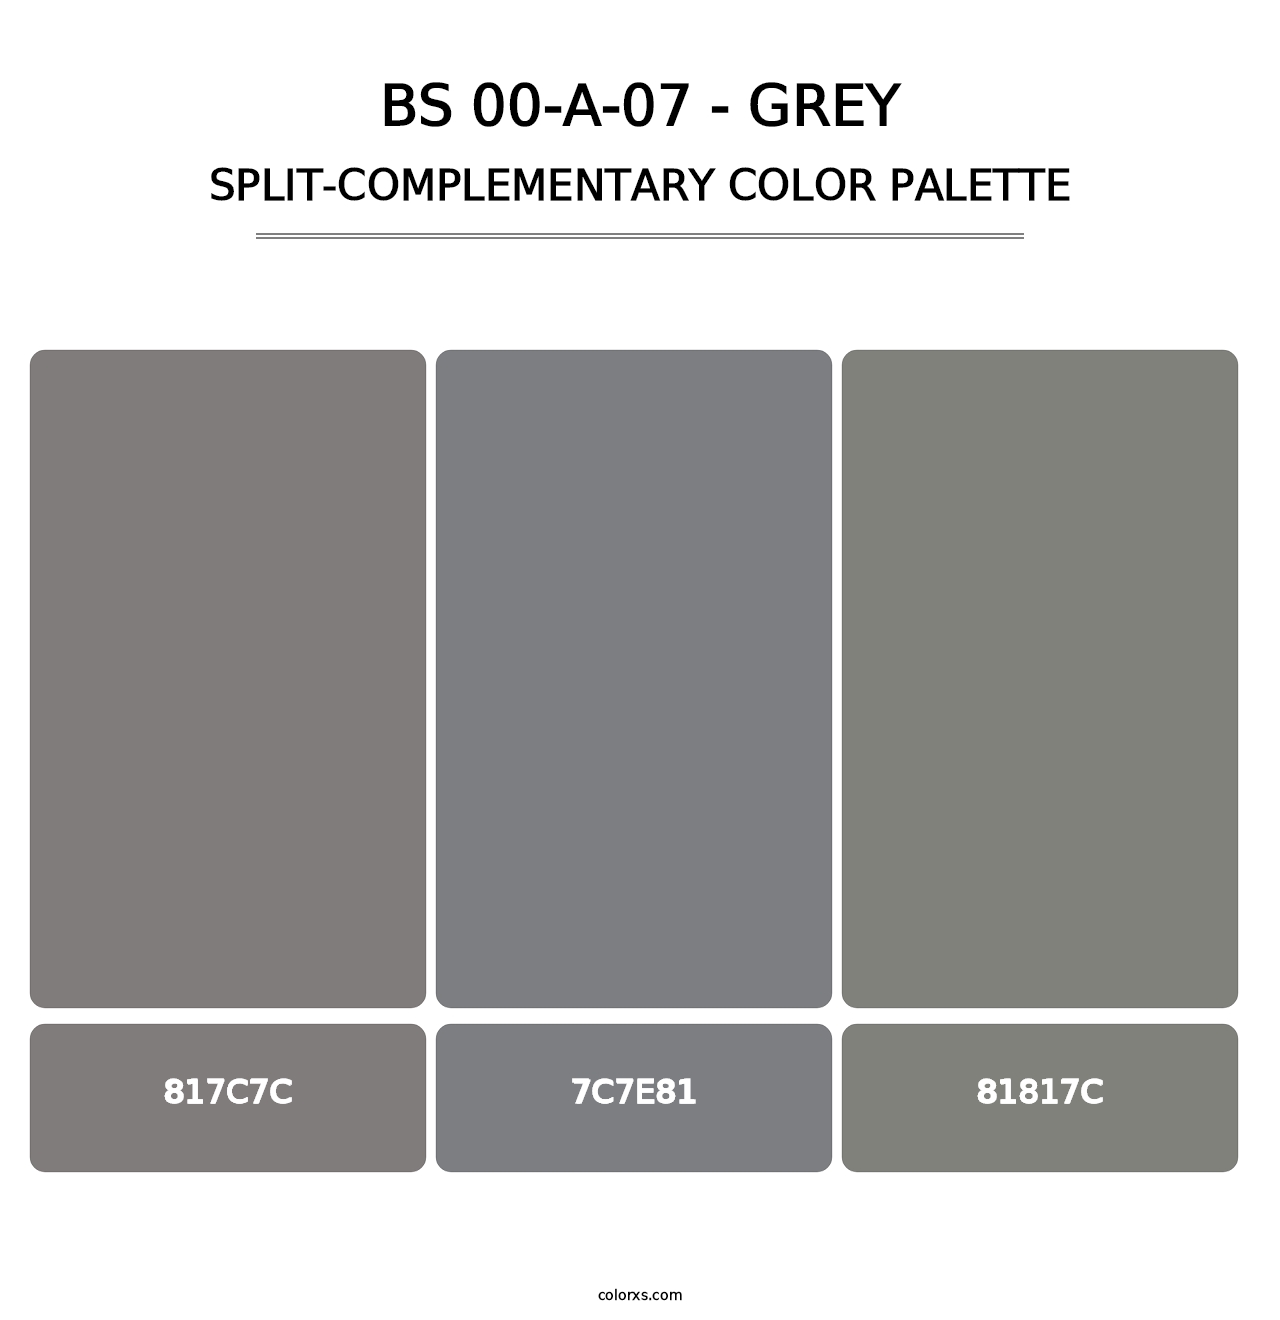 BS 00-A-07 - Grey - Split-Complementary Color Palette